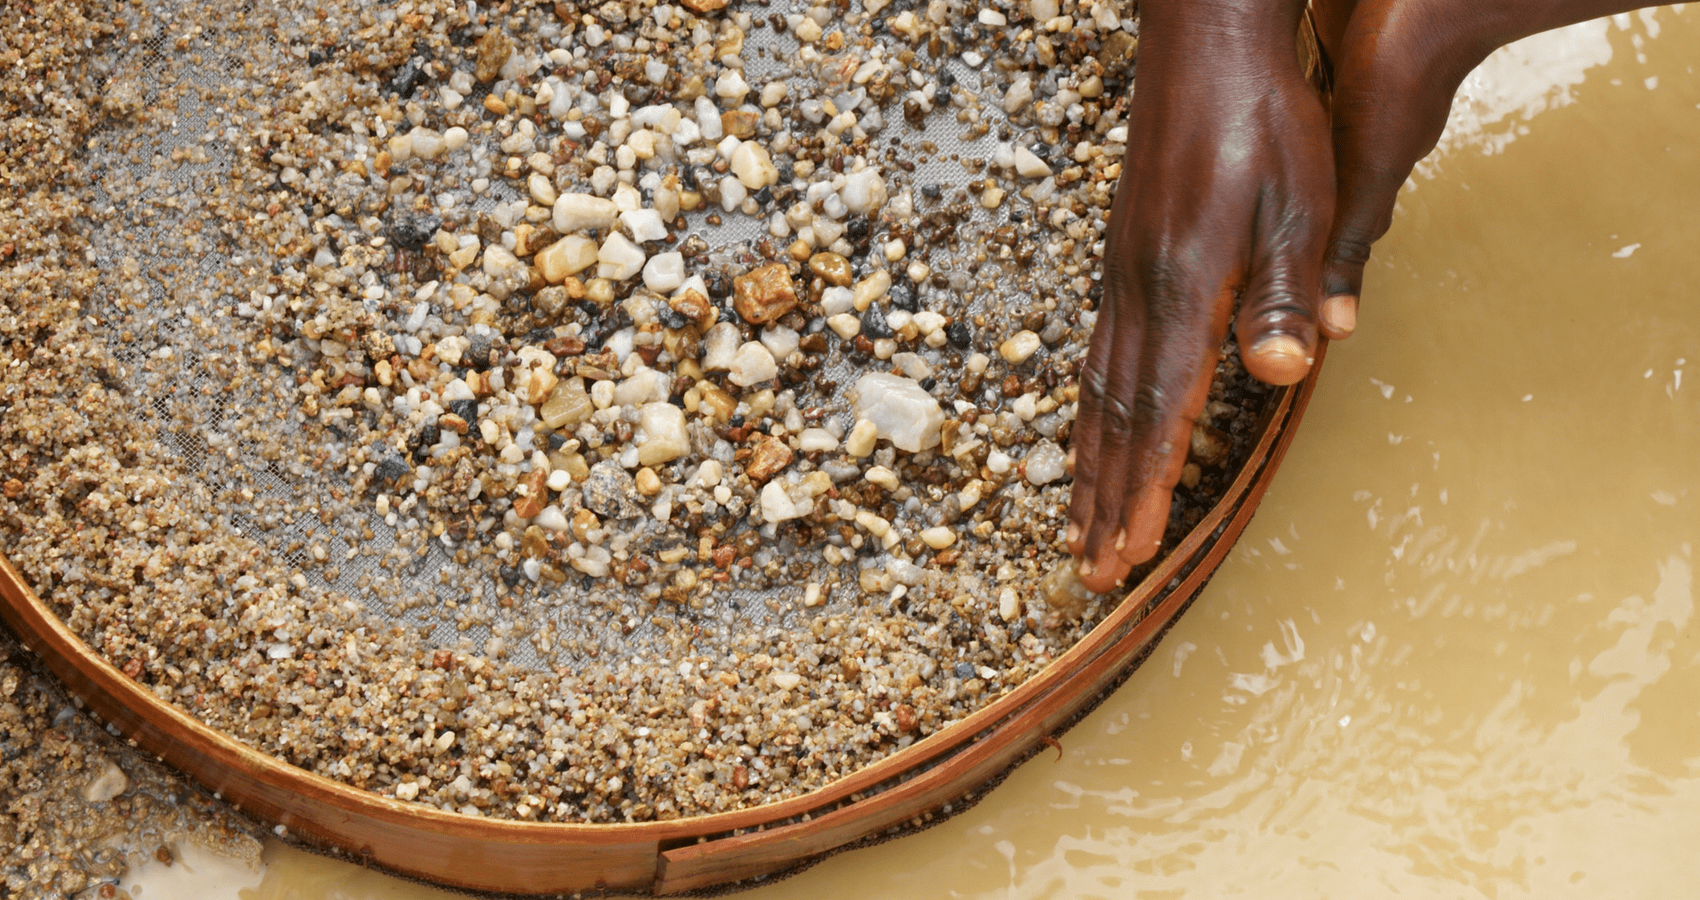 Artisanal and small-scale mining